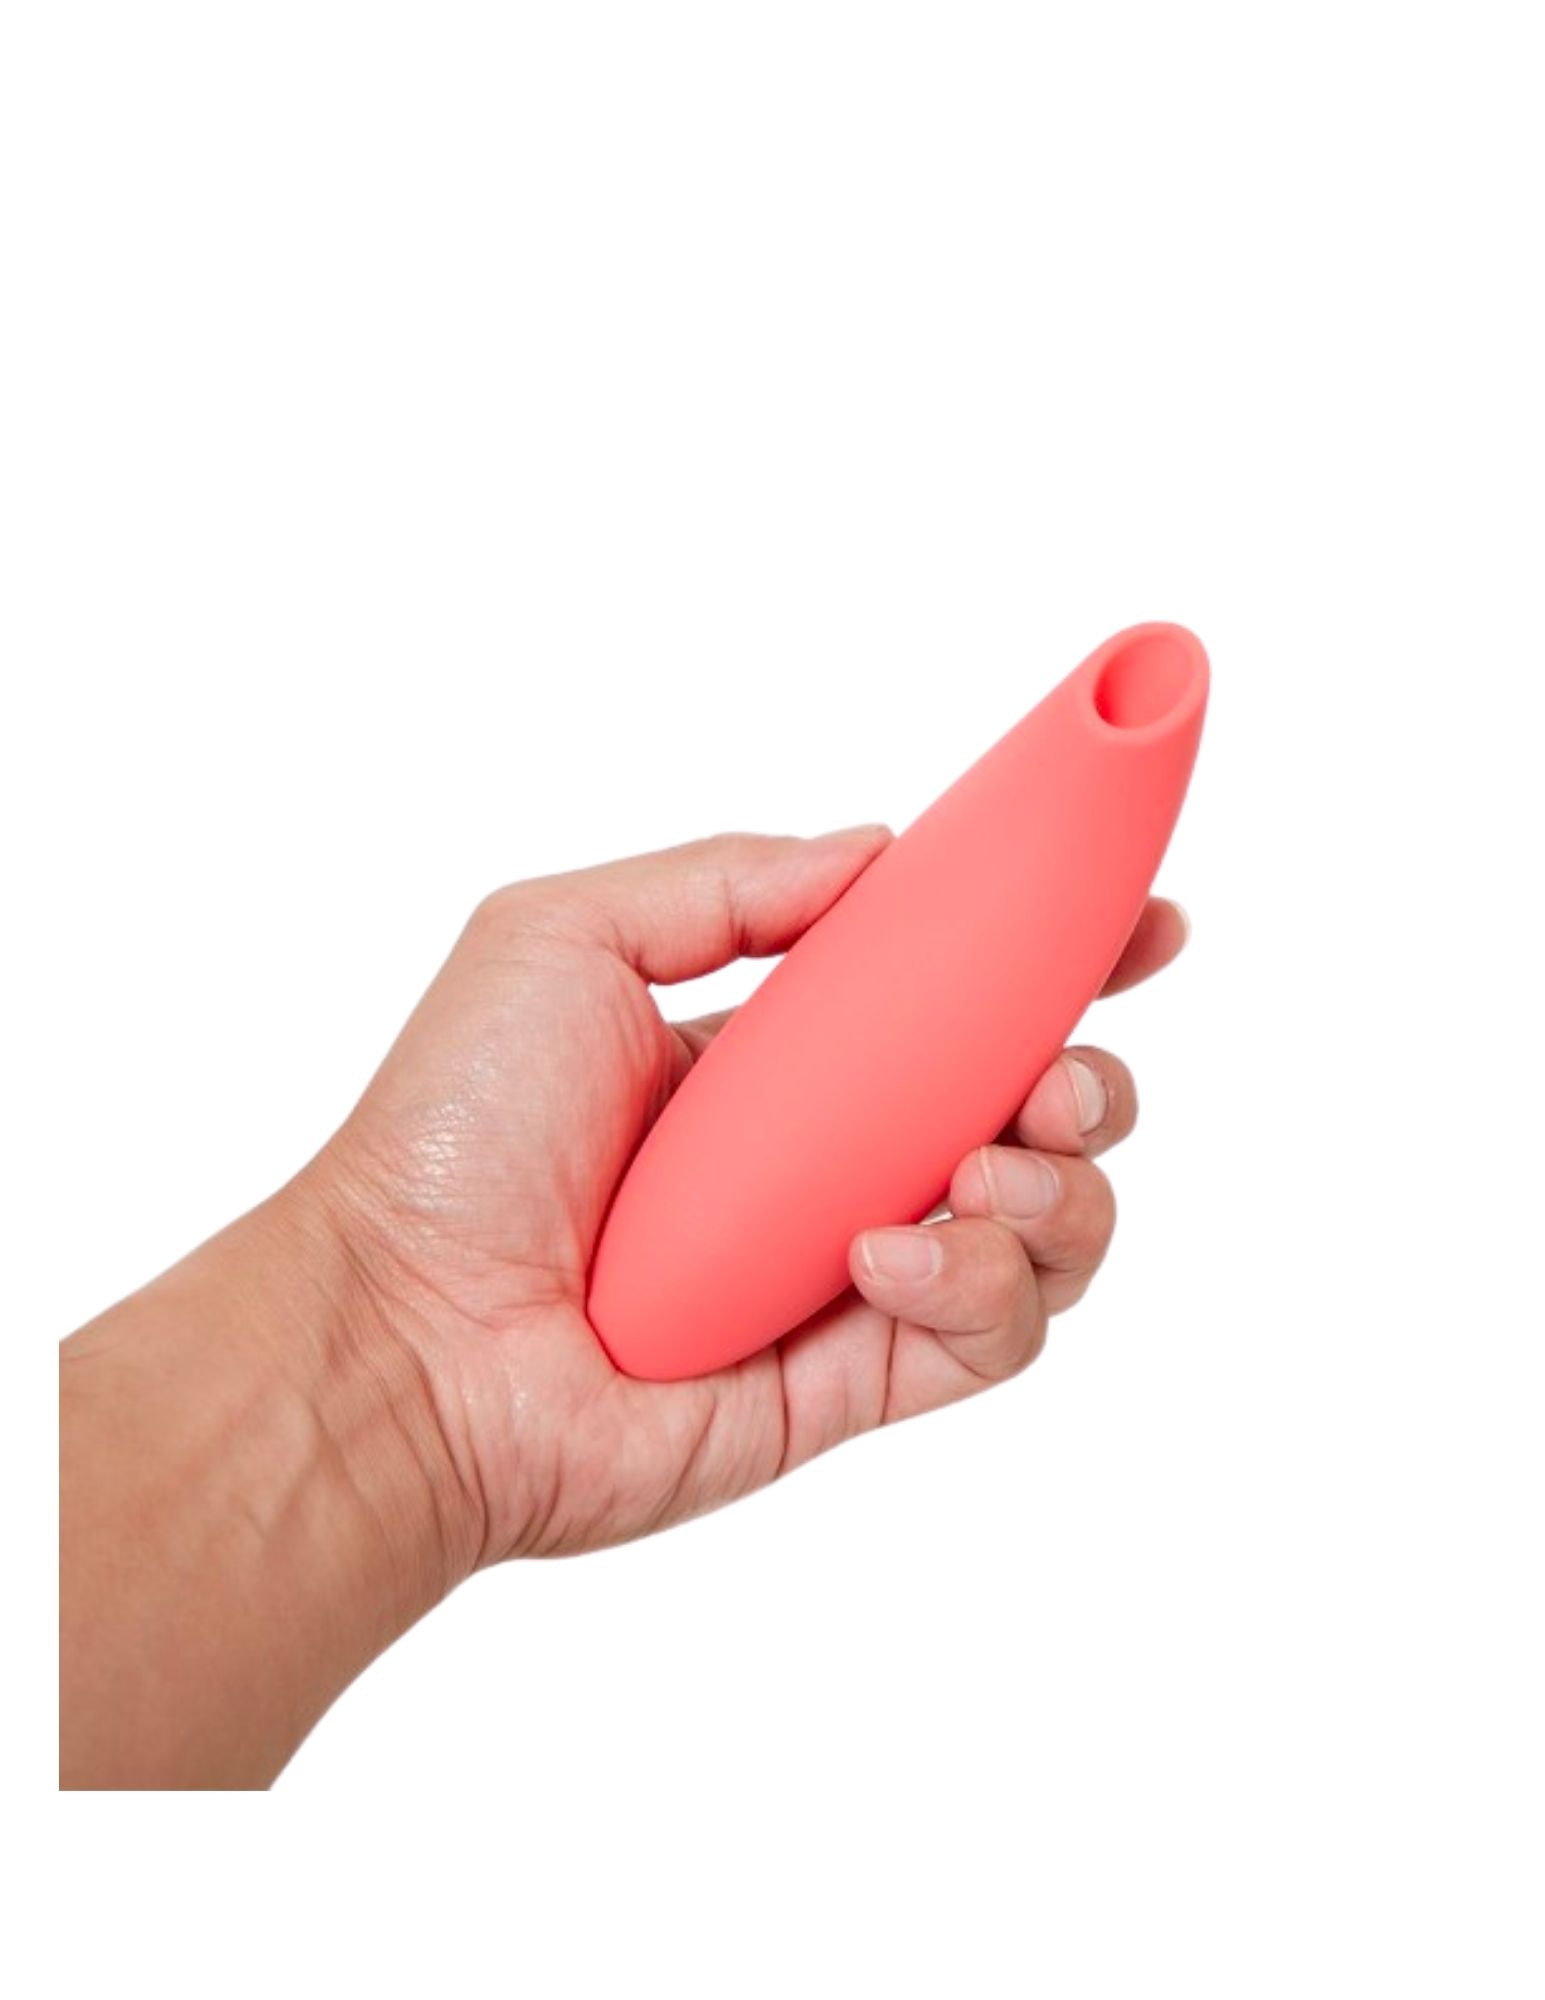 We-vibe Melt Review: Better Than Womanizer's Clitoral ... - An Overview